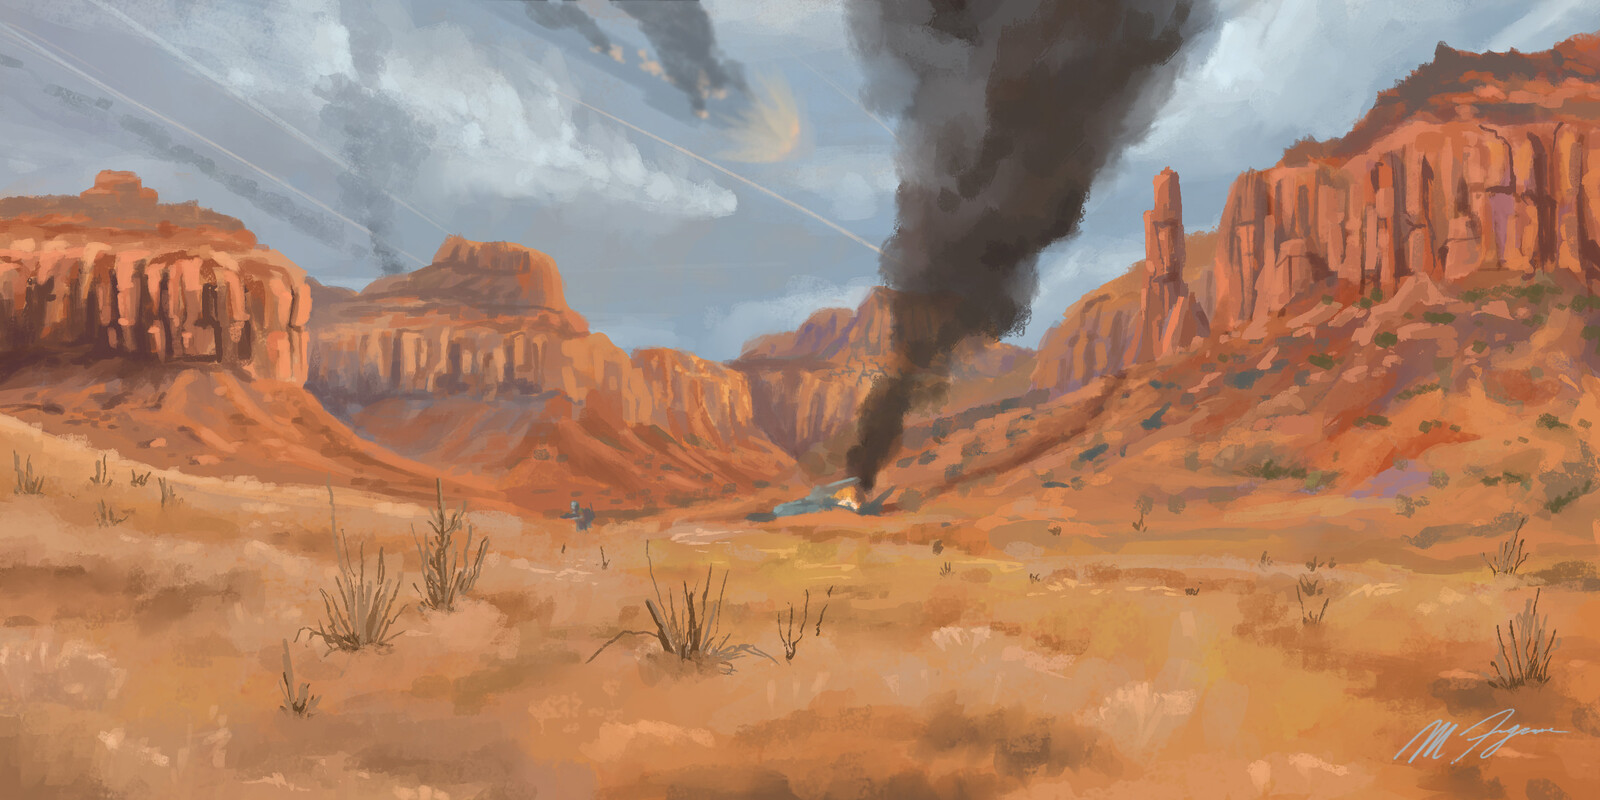 Sci fi version of the canyonlands study.